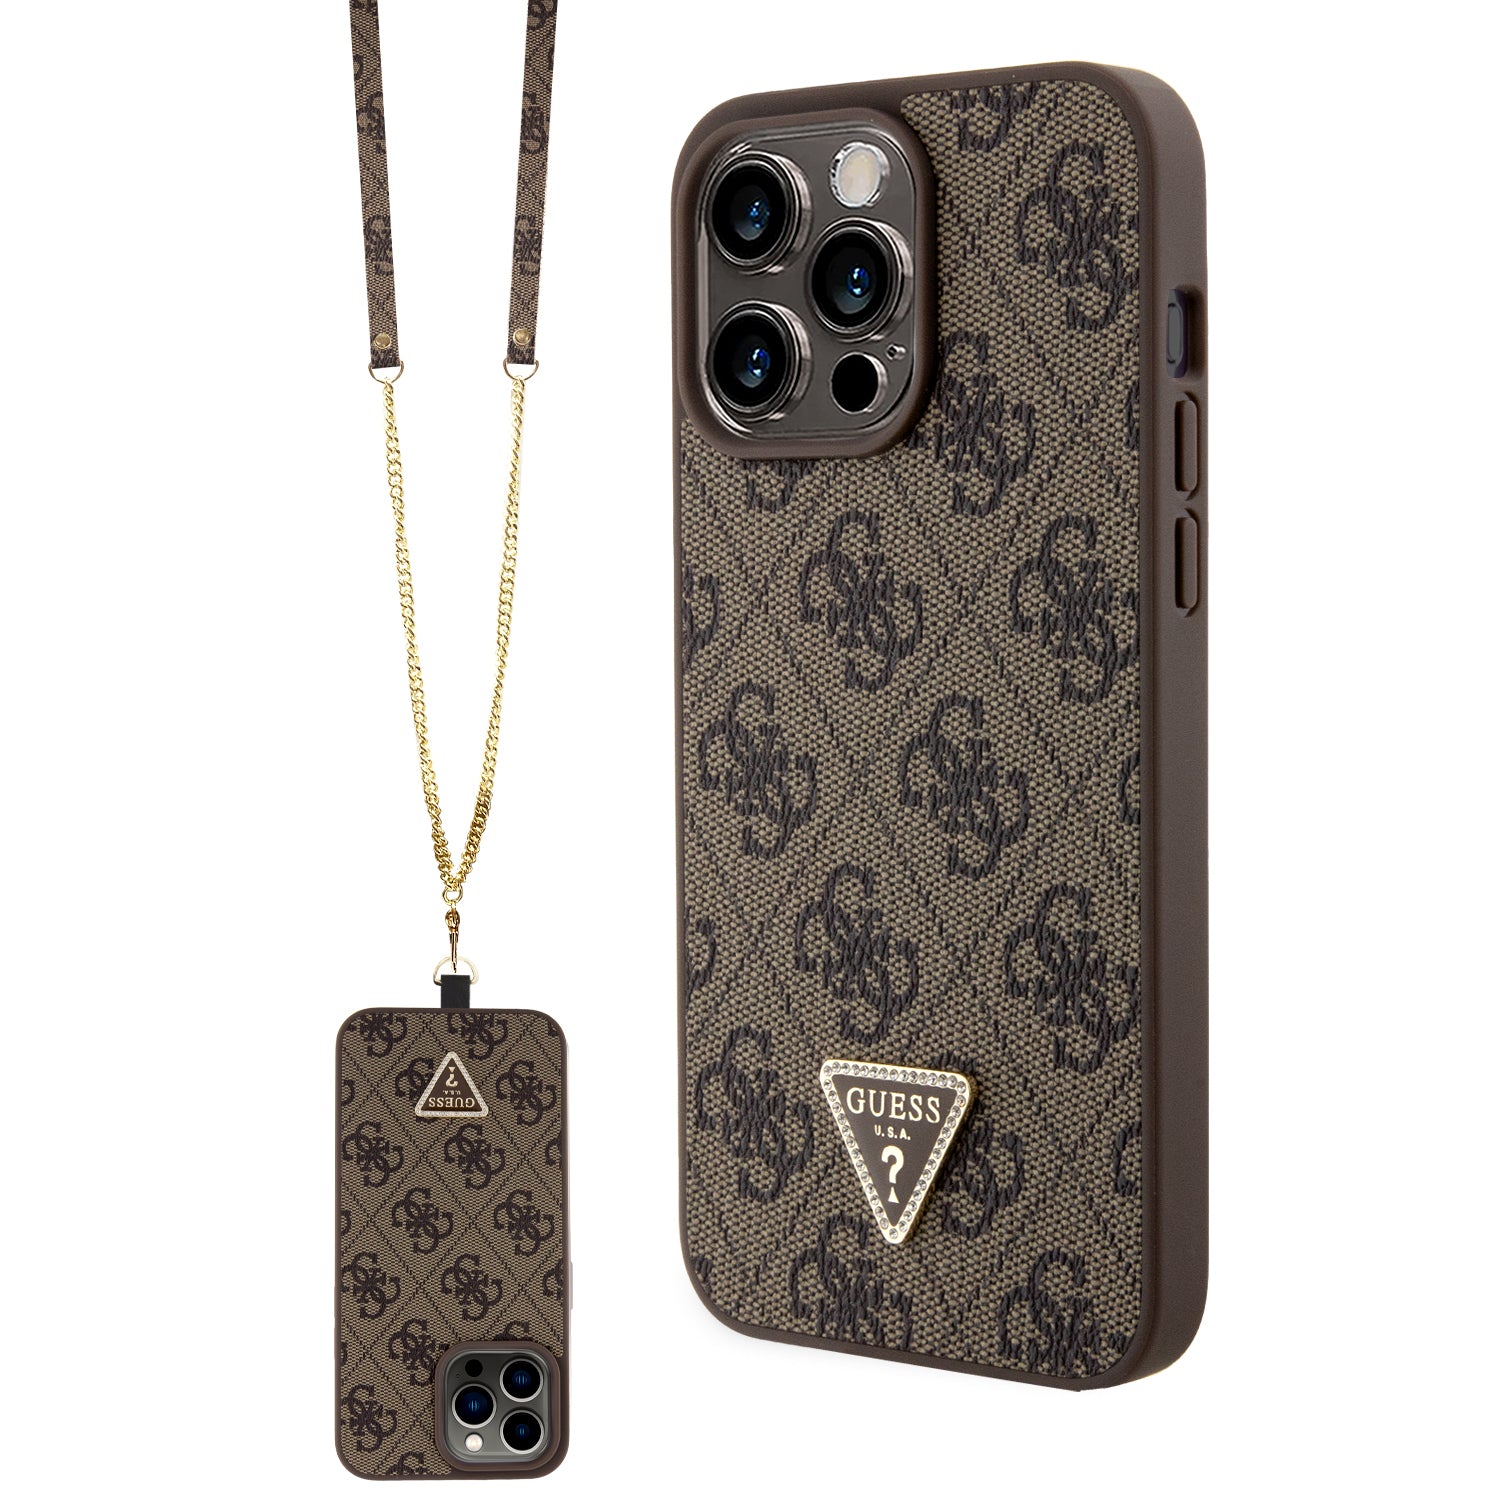 Case Protector GUESS charm para iPhone 12 Pro MAX - FASHIONCEL